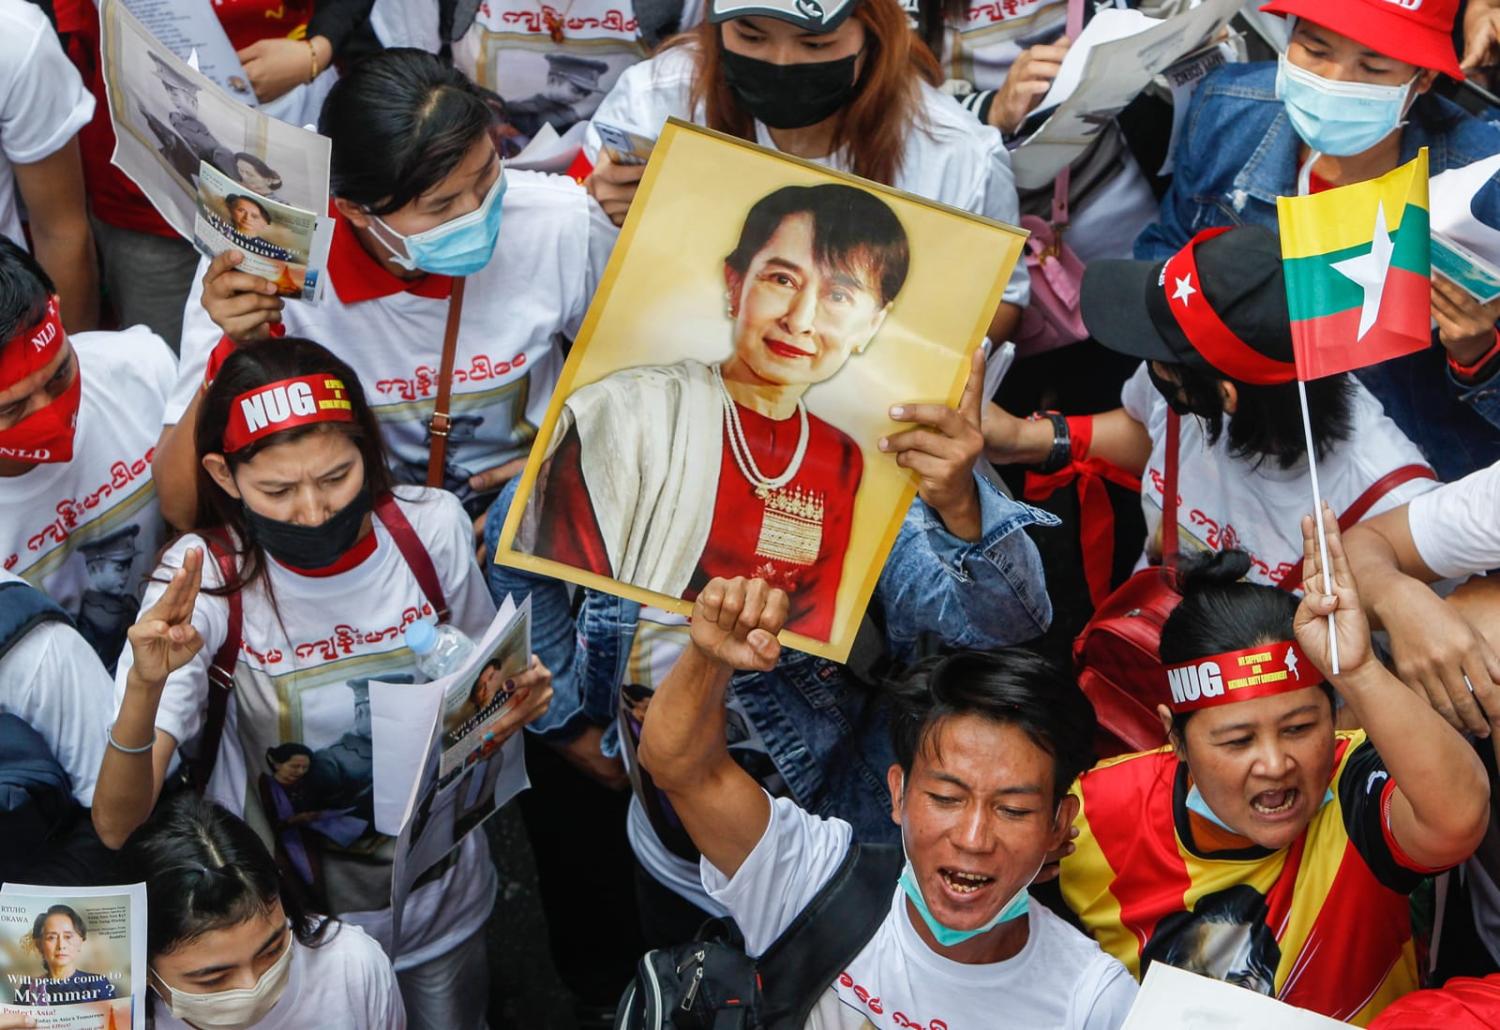 Demonstrators hold a portrait of Aung San Suu Kyi and raise a three-finger salute during a rally to mark the second anniversary of the February 2021 coup in Myanmar outside the Myanmar embassy in Bangkok (Chaiwat Subprasom via Getty Images)